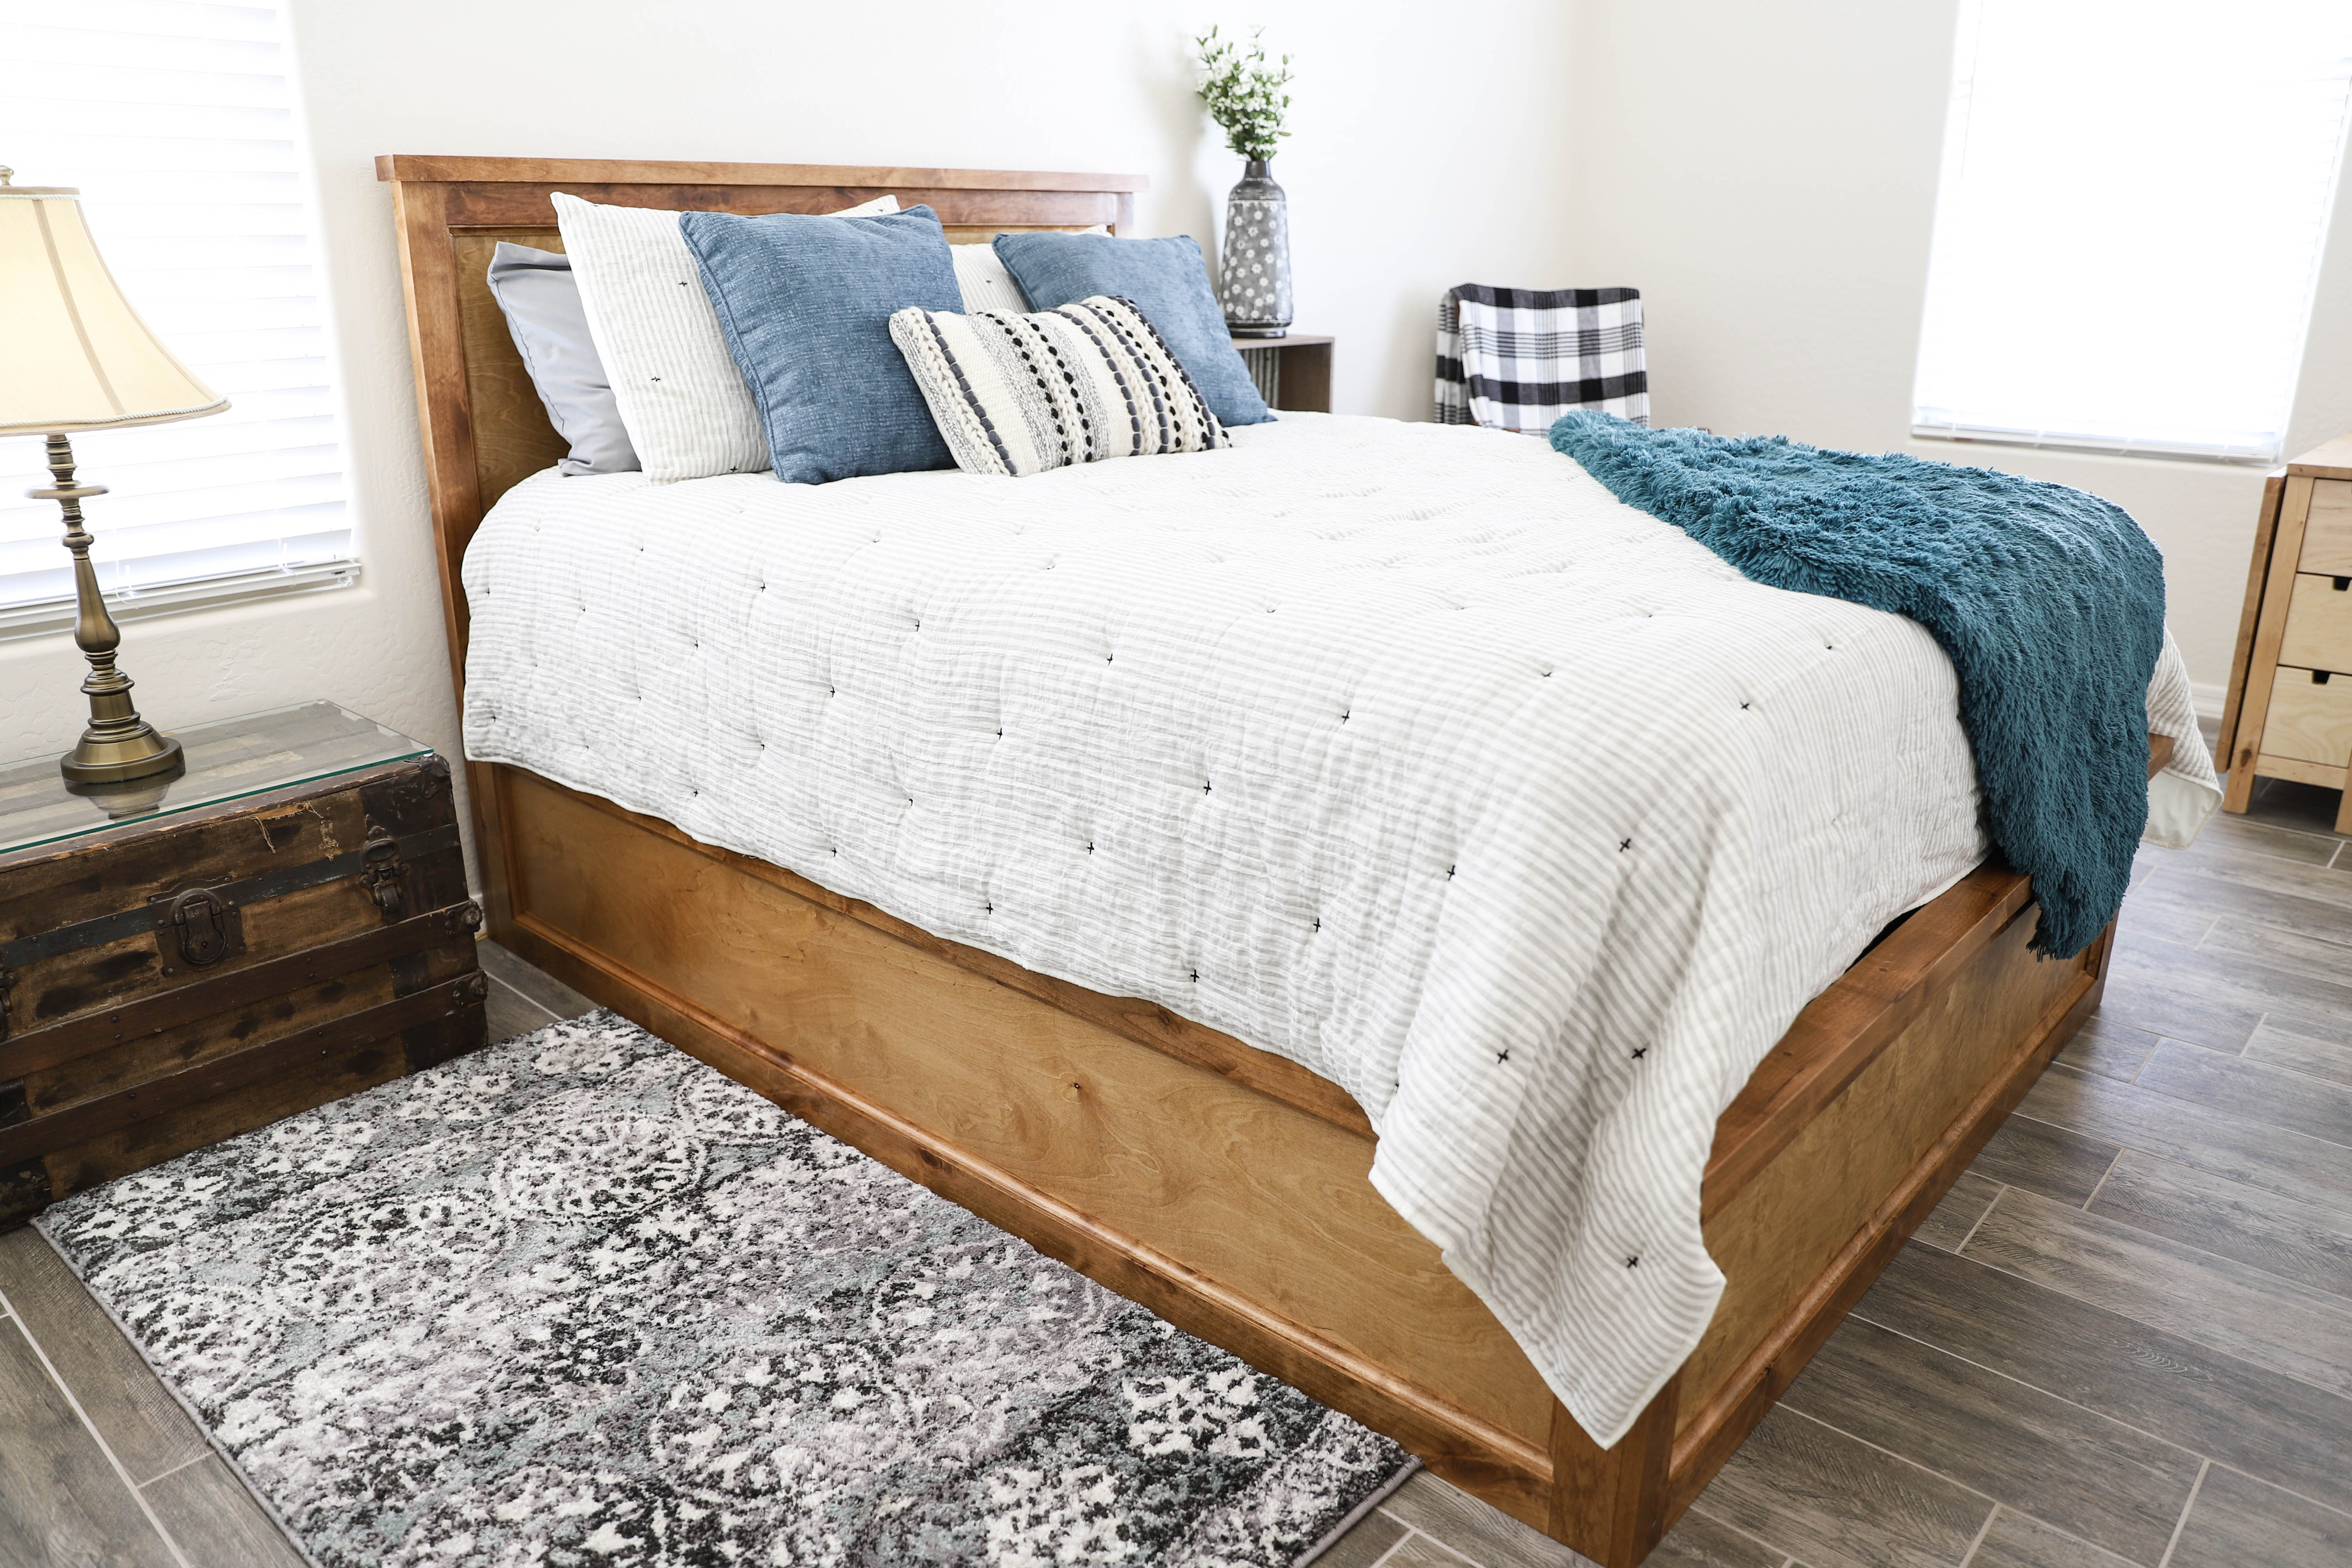 How To Build A Queen Size Storage Bed, Diy Rustic Queen Bed Frame With Storage Boxes